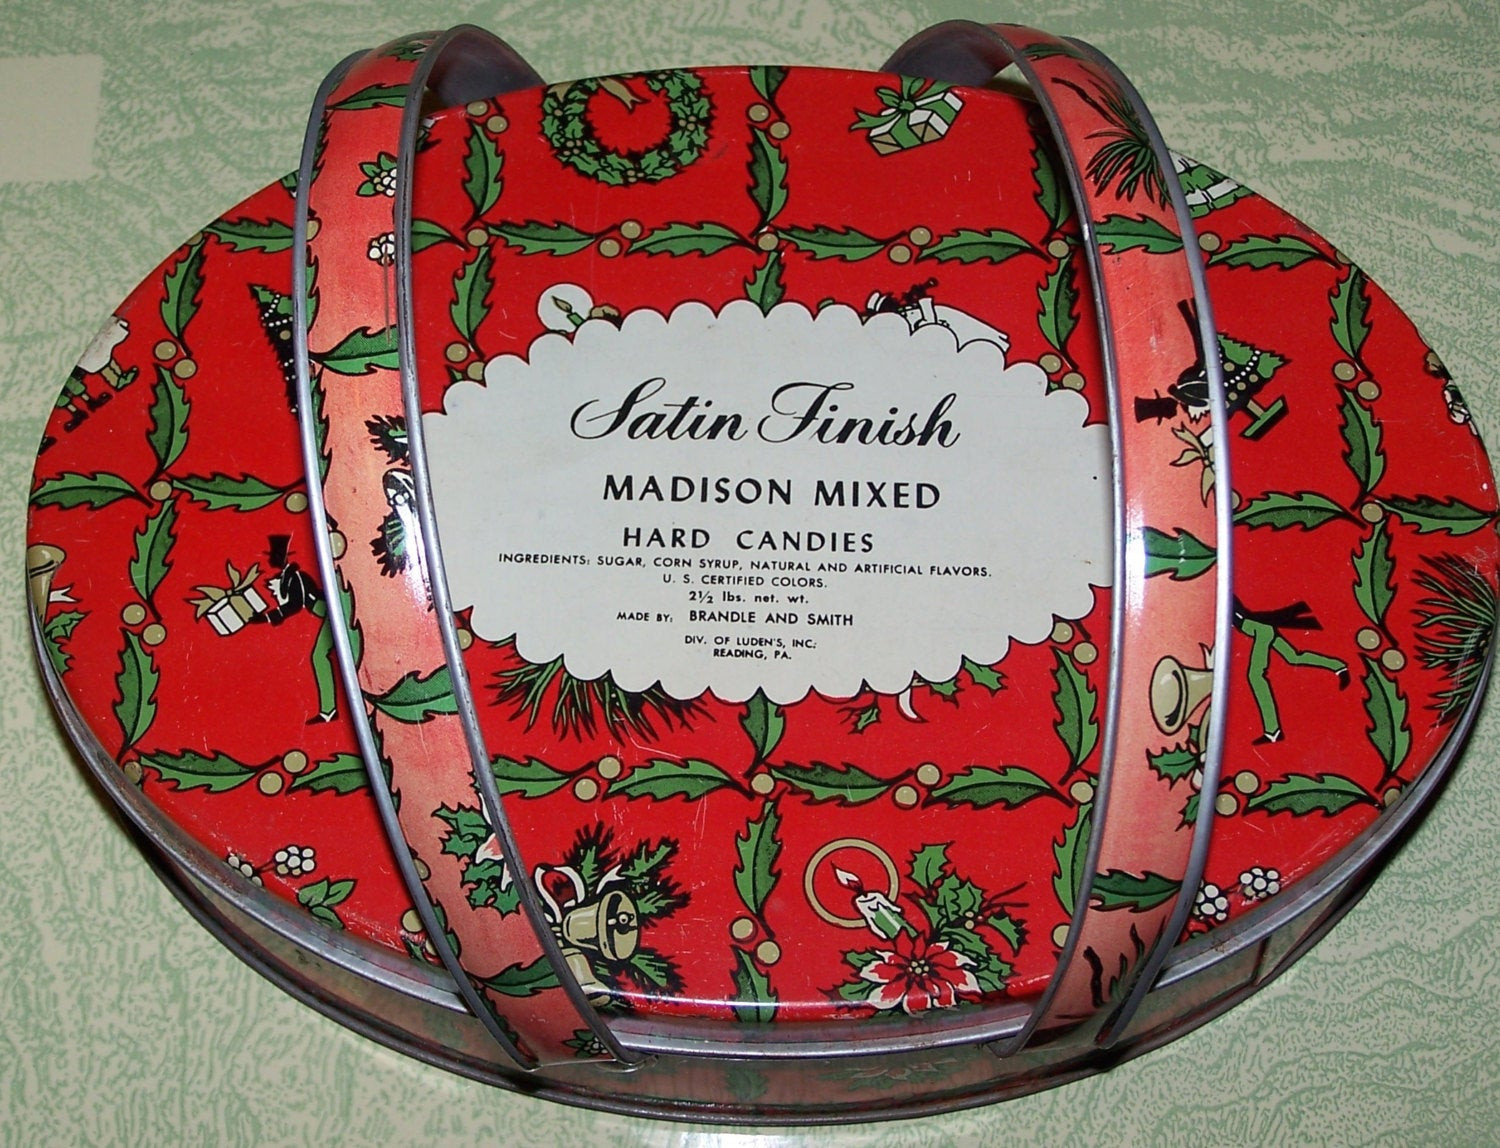 Vintage Christmas Candy
 Vintage retro Christmas candy advertising tin Madison mixed